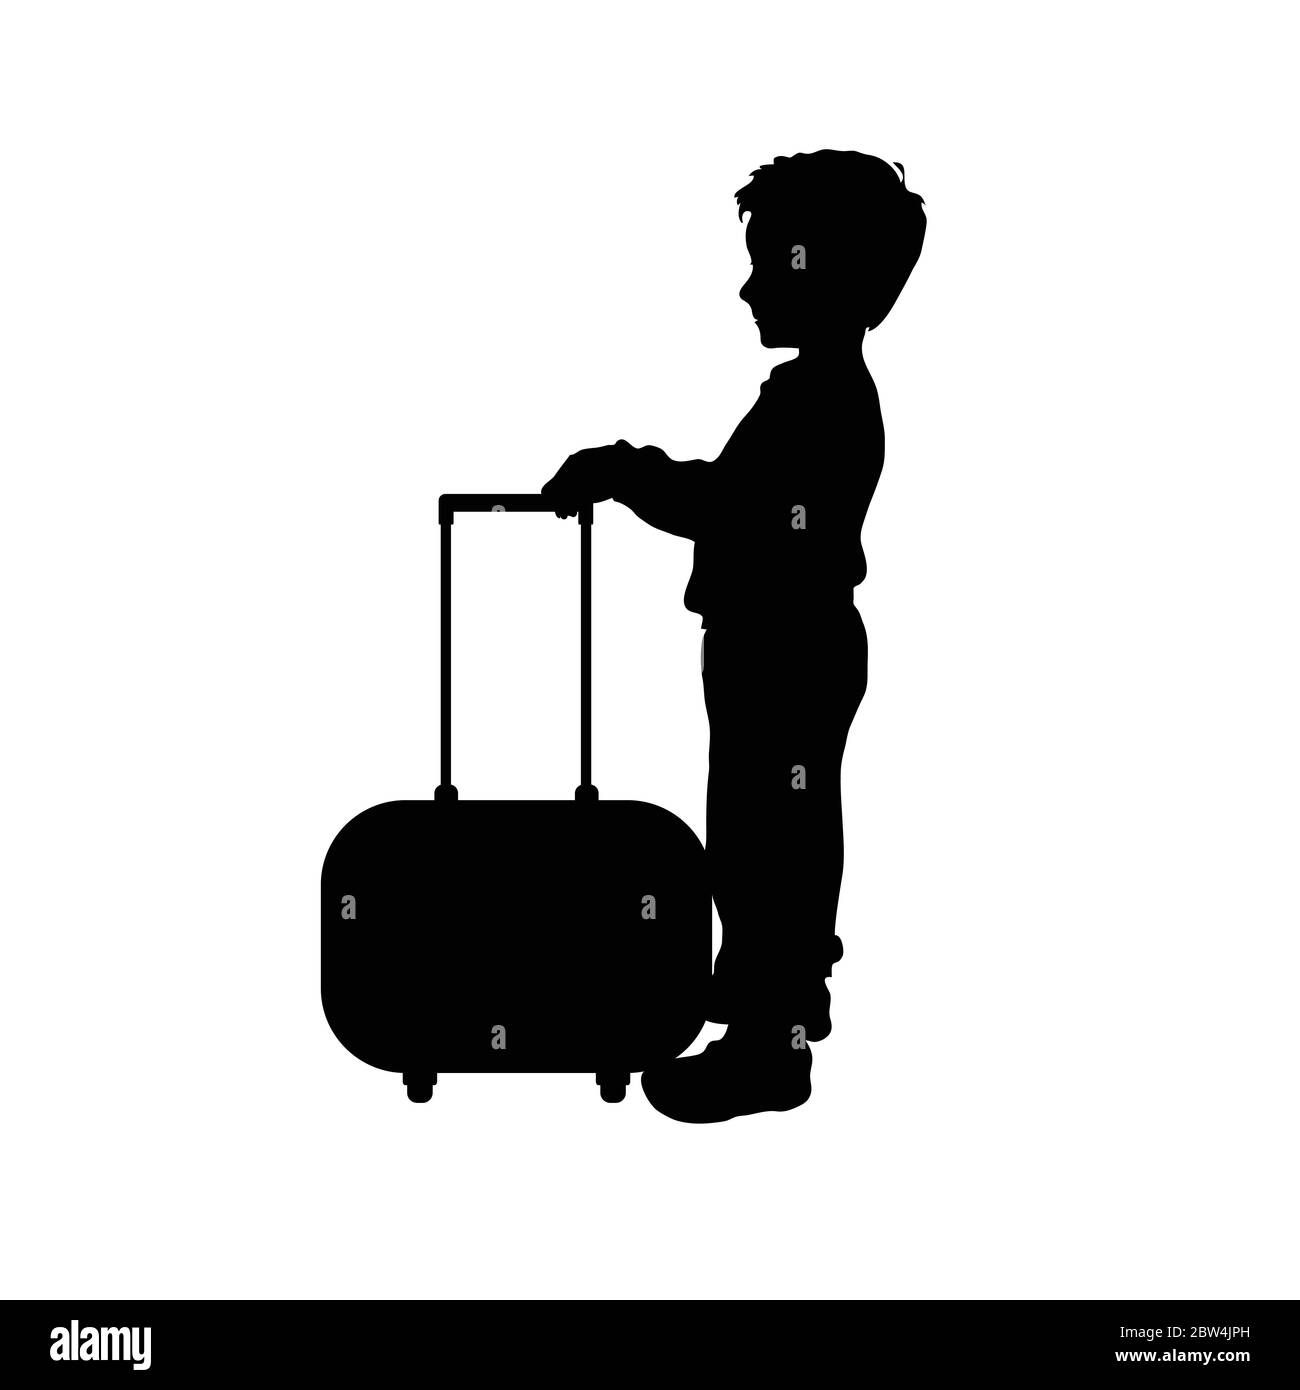 child boy silhouette with travel bag art illustration Stock Vector